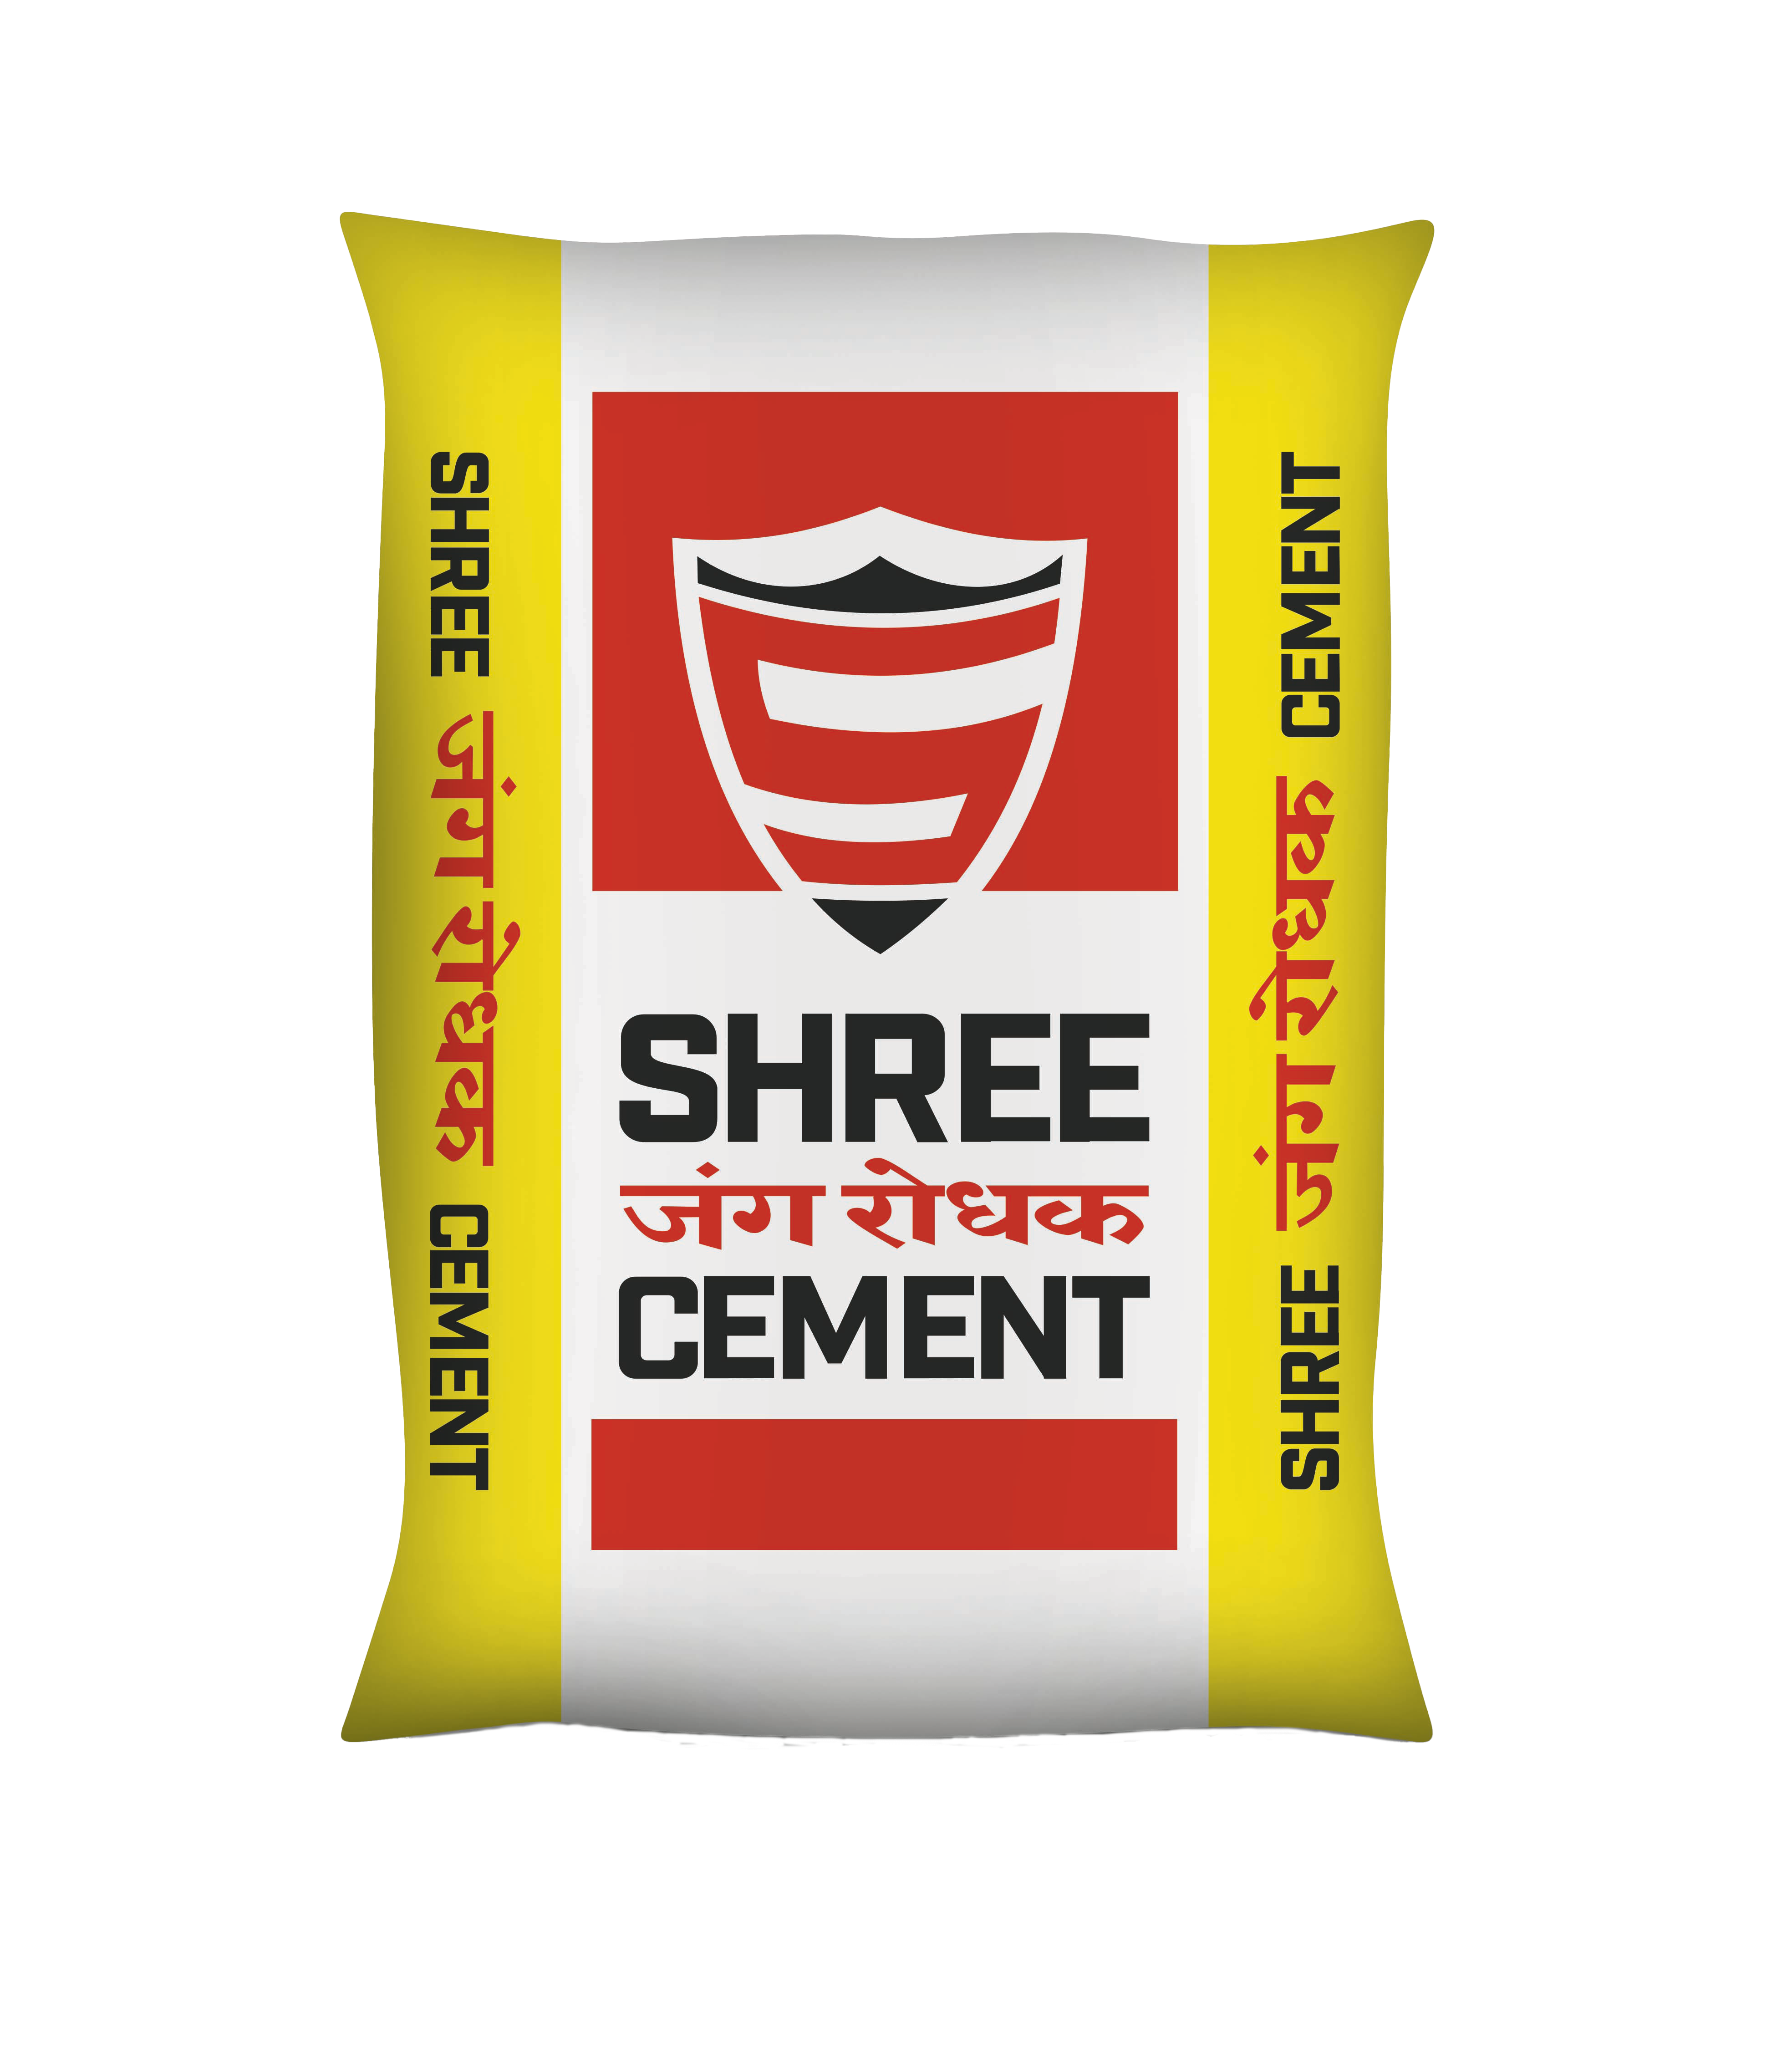 Our Business - Shree Cement | Shree Cement